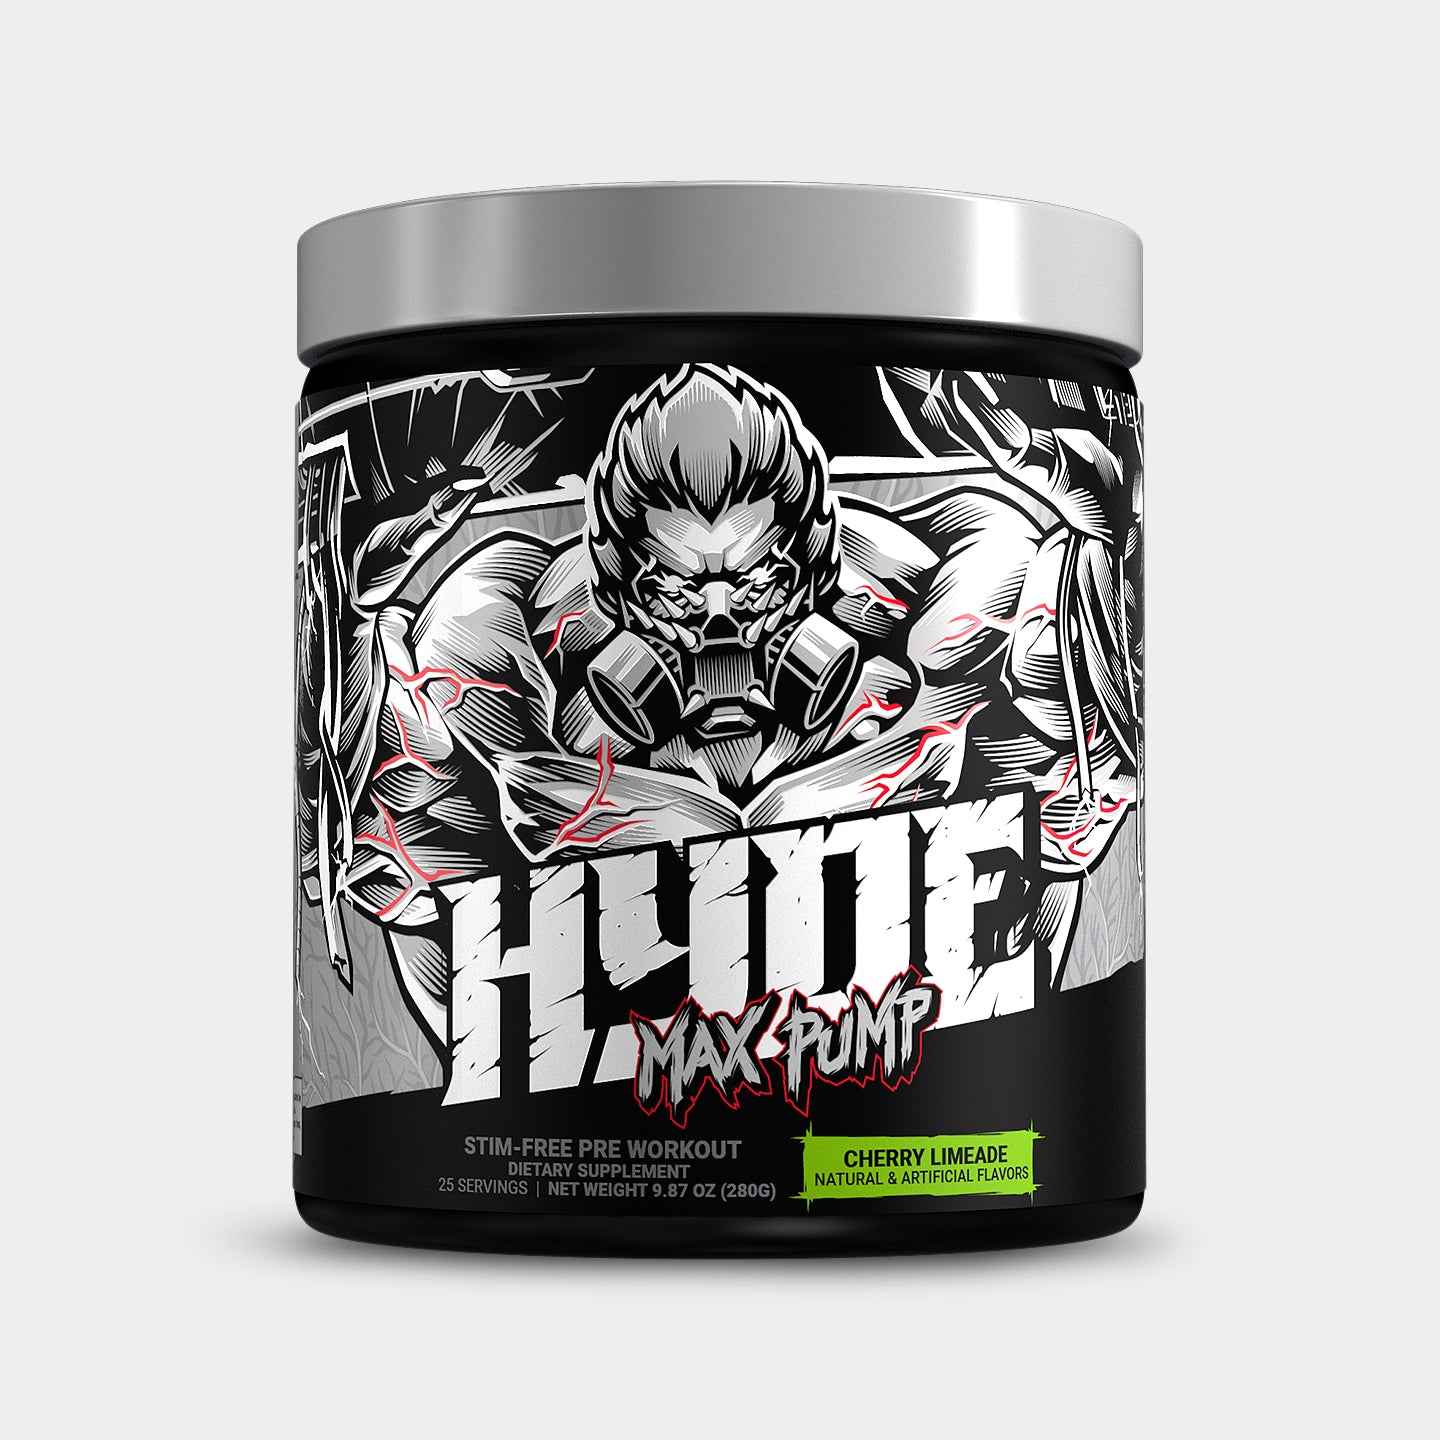 Pro Supps HYDE Max Pump Stim-Free Pre Workout, Cherry Limeade, 25 Servings A1